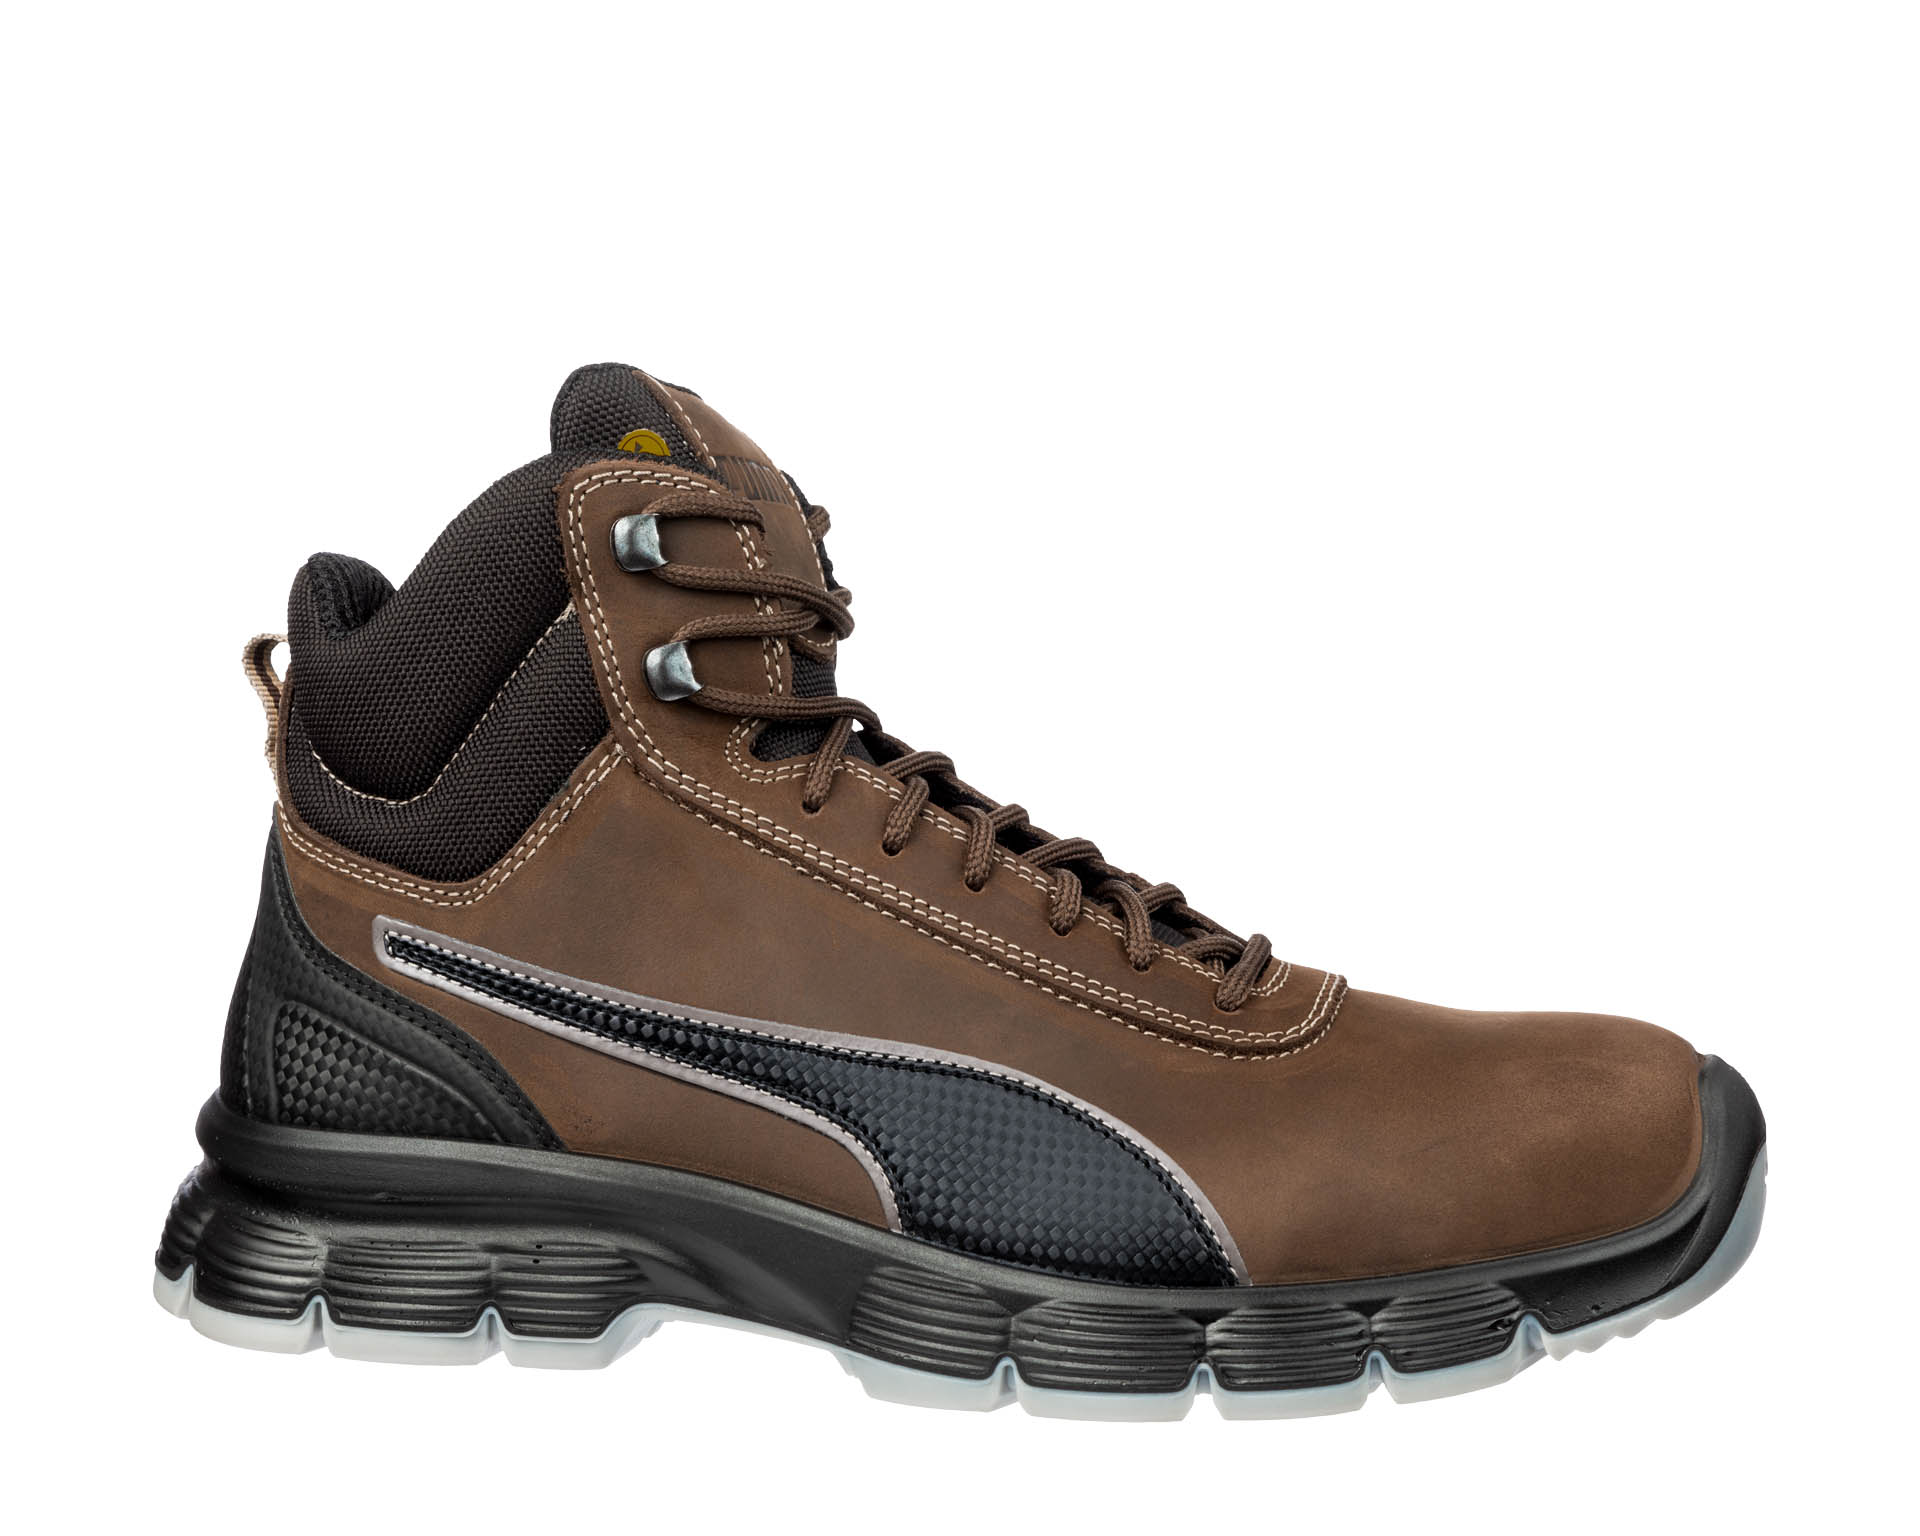 Safety MID English shoes PUMA Puma | ESD SAFETY S3 BROWN CONDOR SRC safety